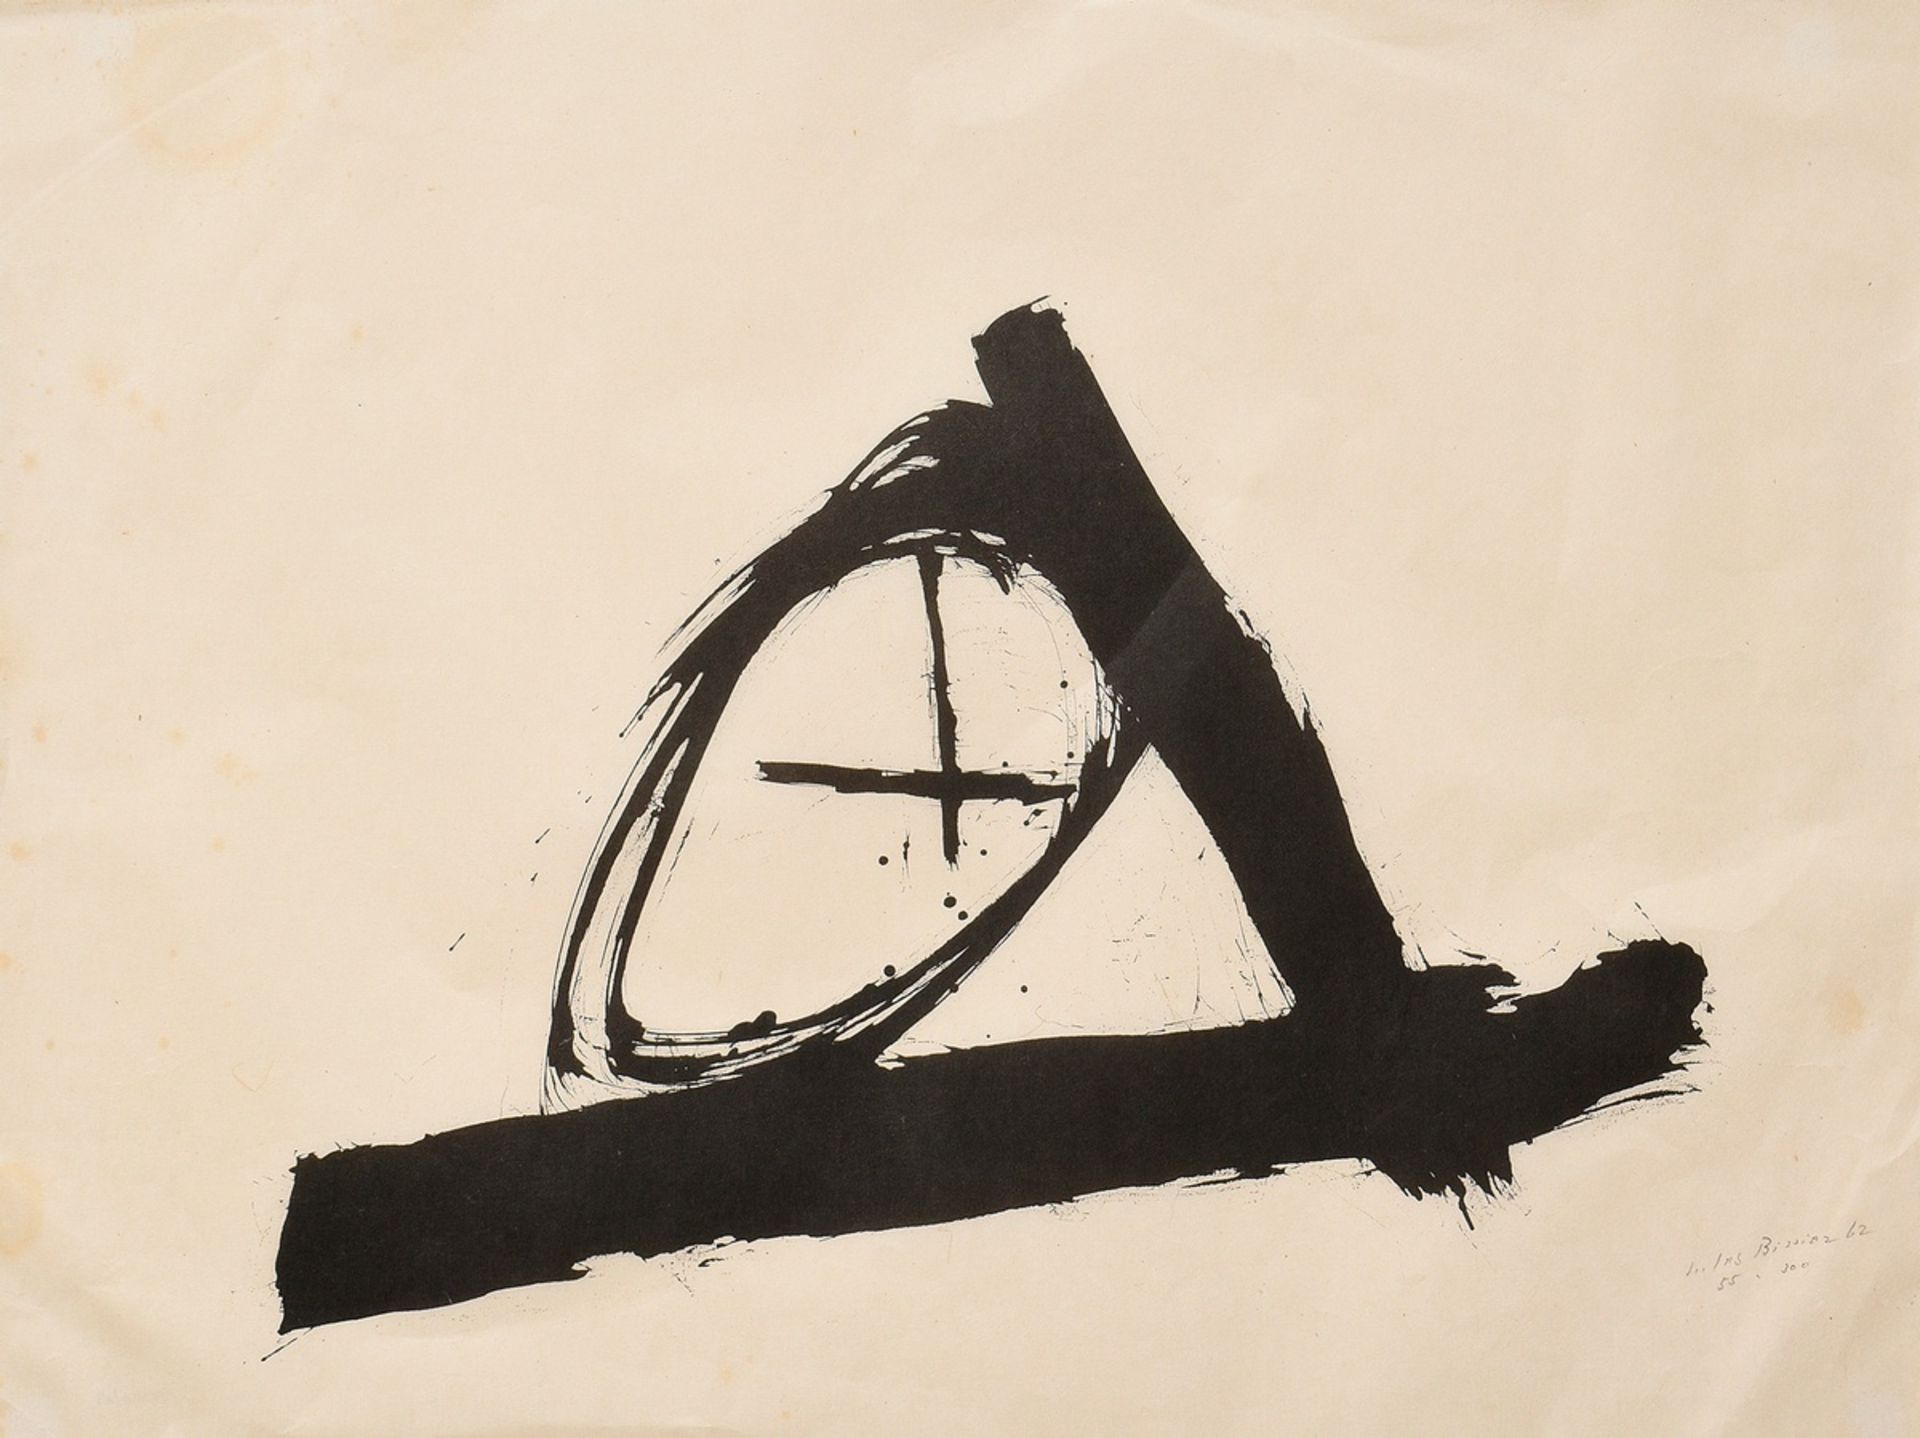 Bissier, Julius (1893-1965) "Composition with cross and circle" 1962, lithograph, 55/300, sign./dat